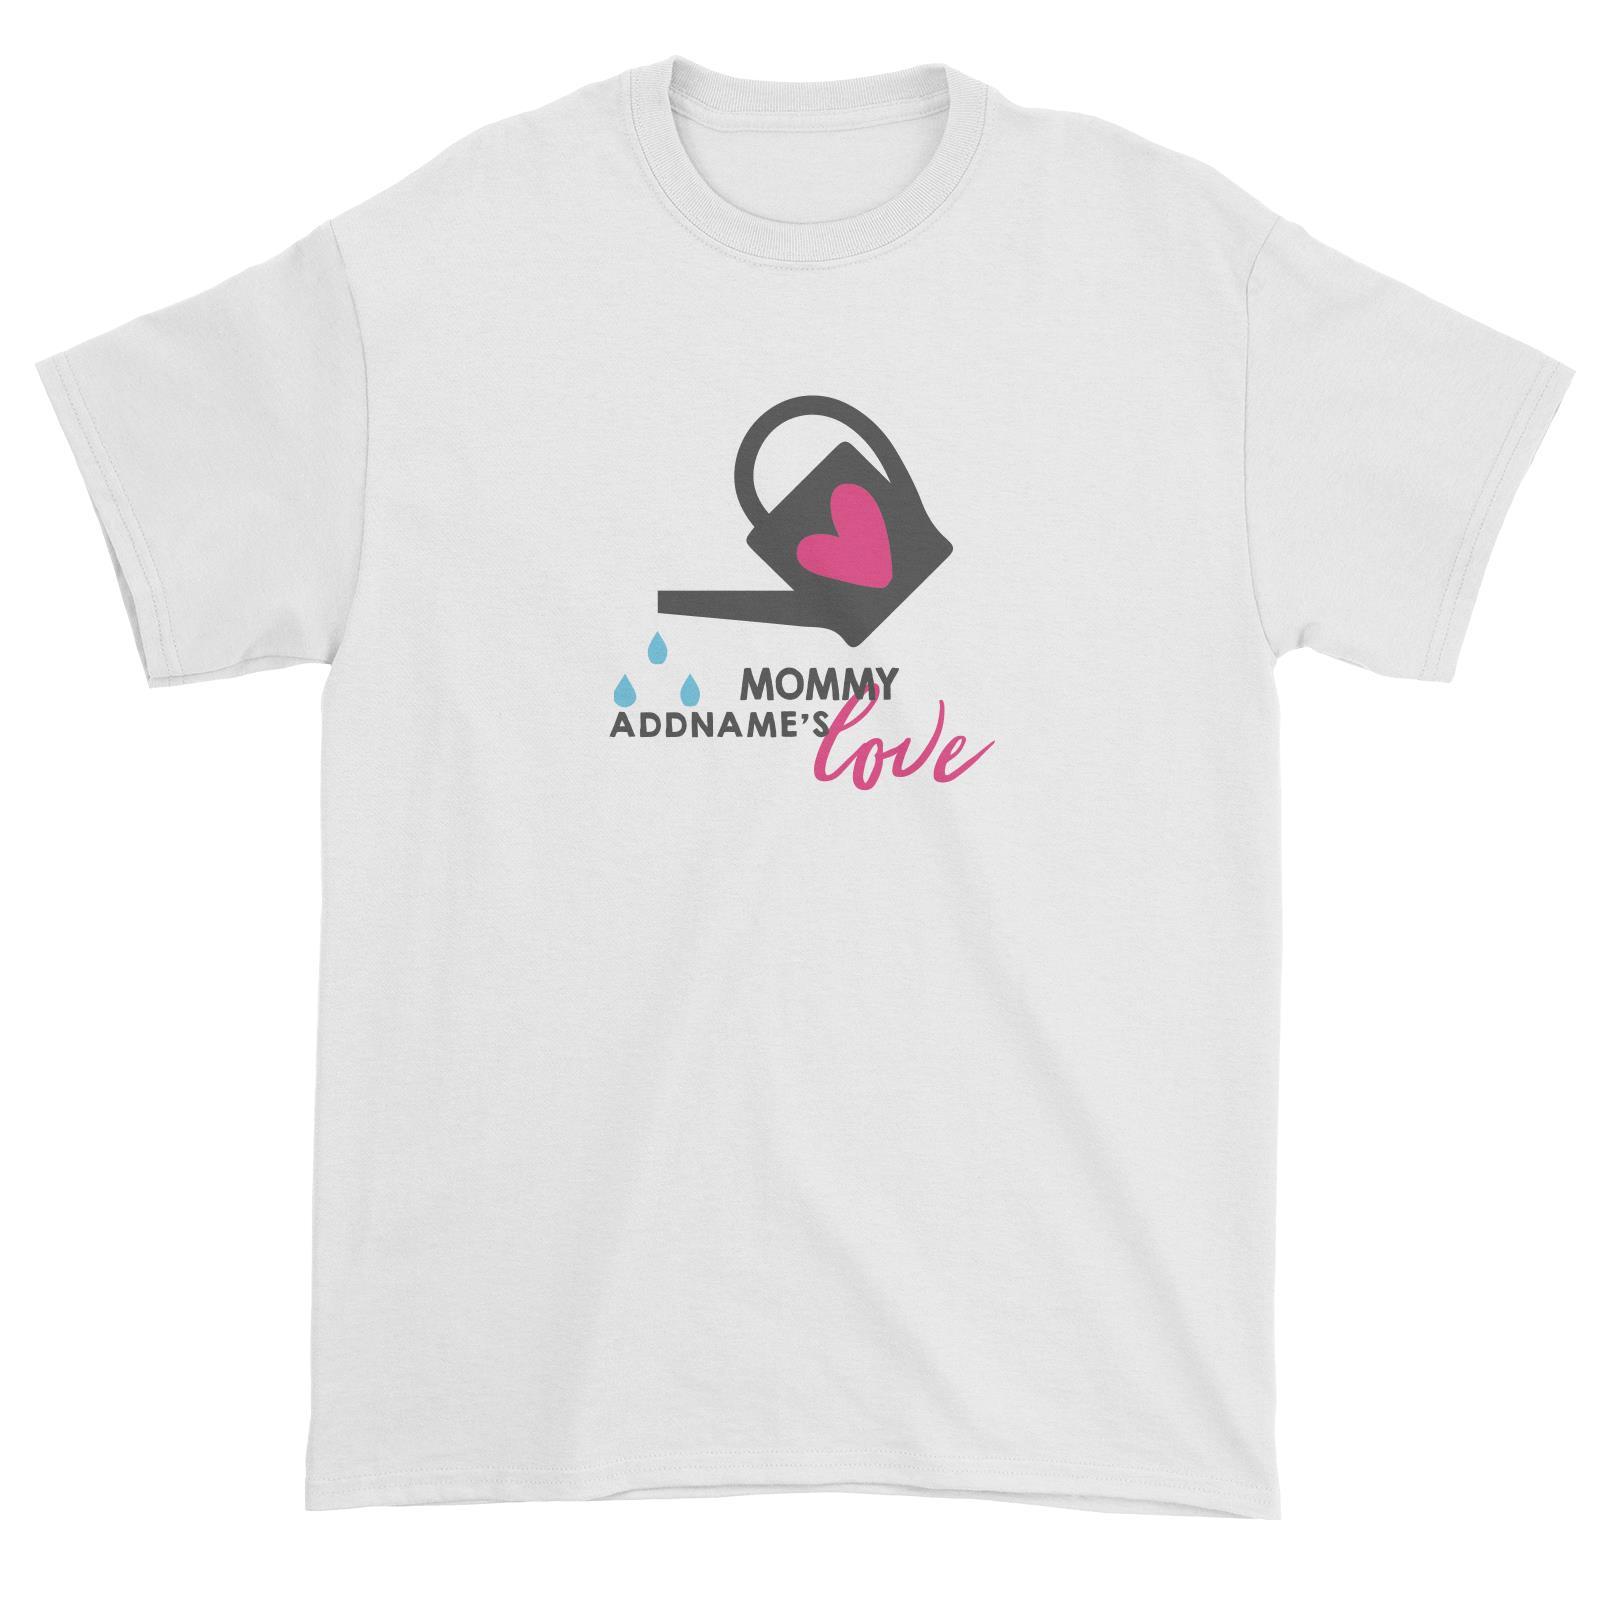 Nurturing Mommy's Love Addname Unisex T-Shirt  Matching Family Personalizable Designs